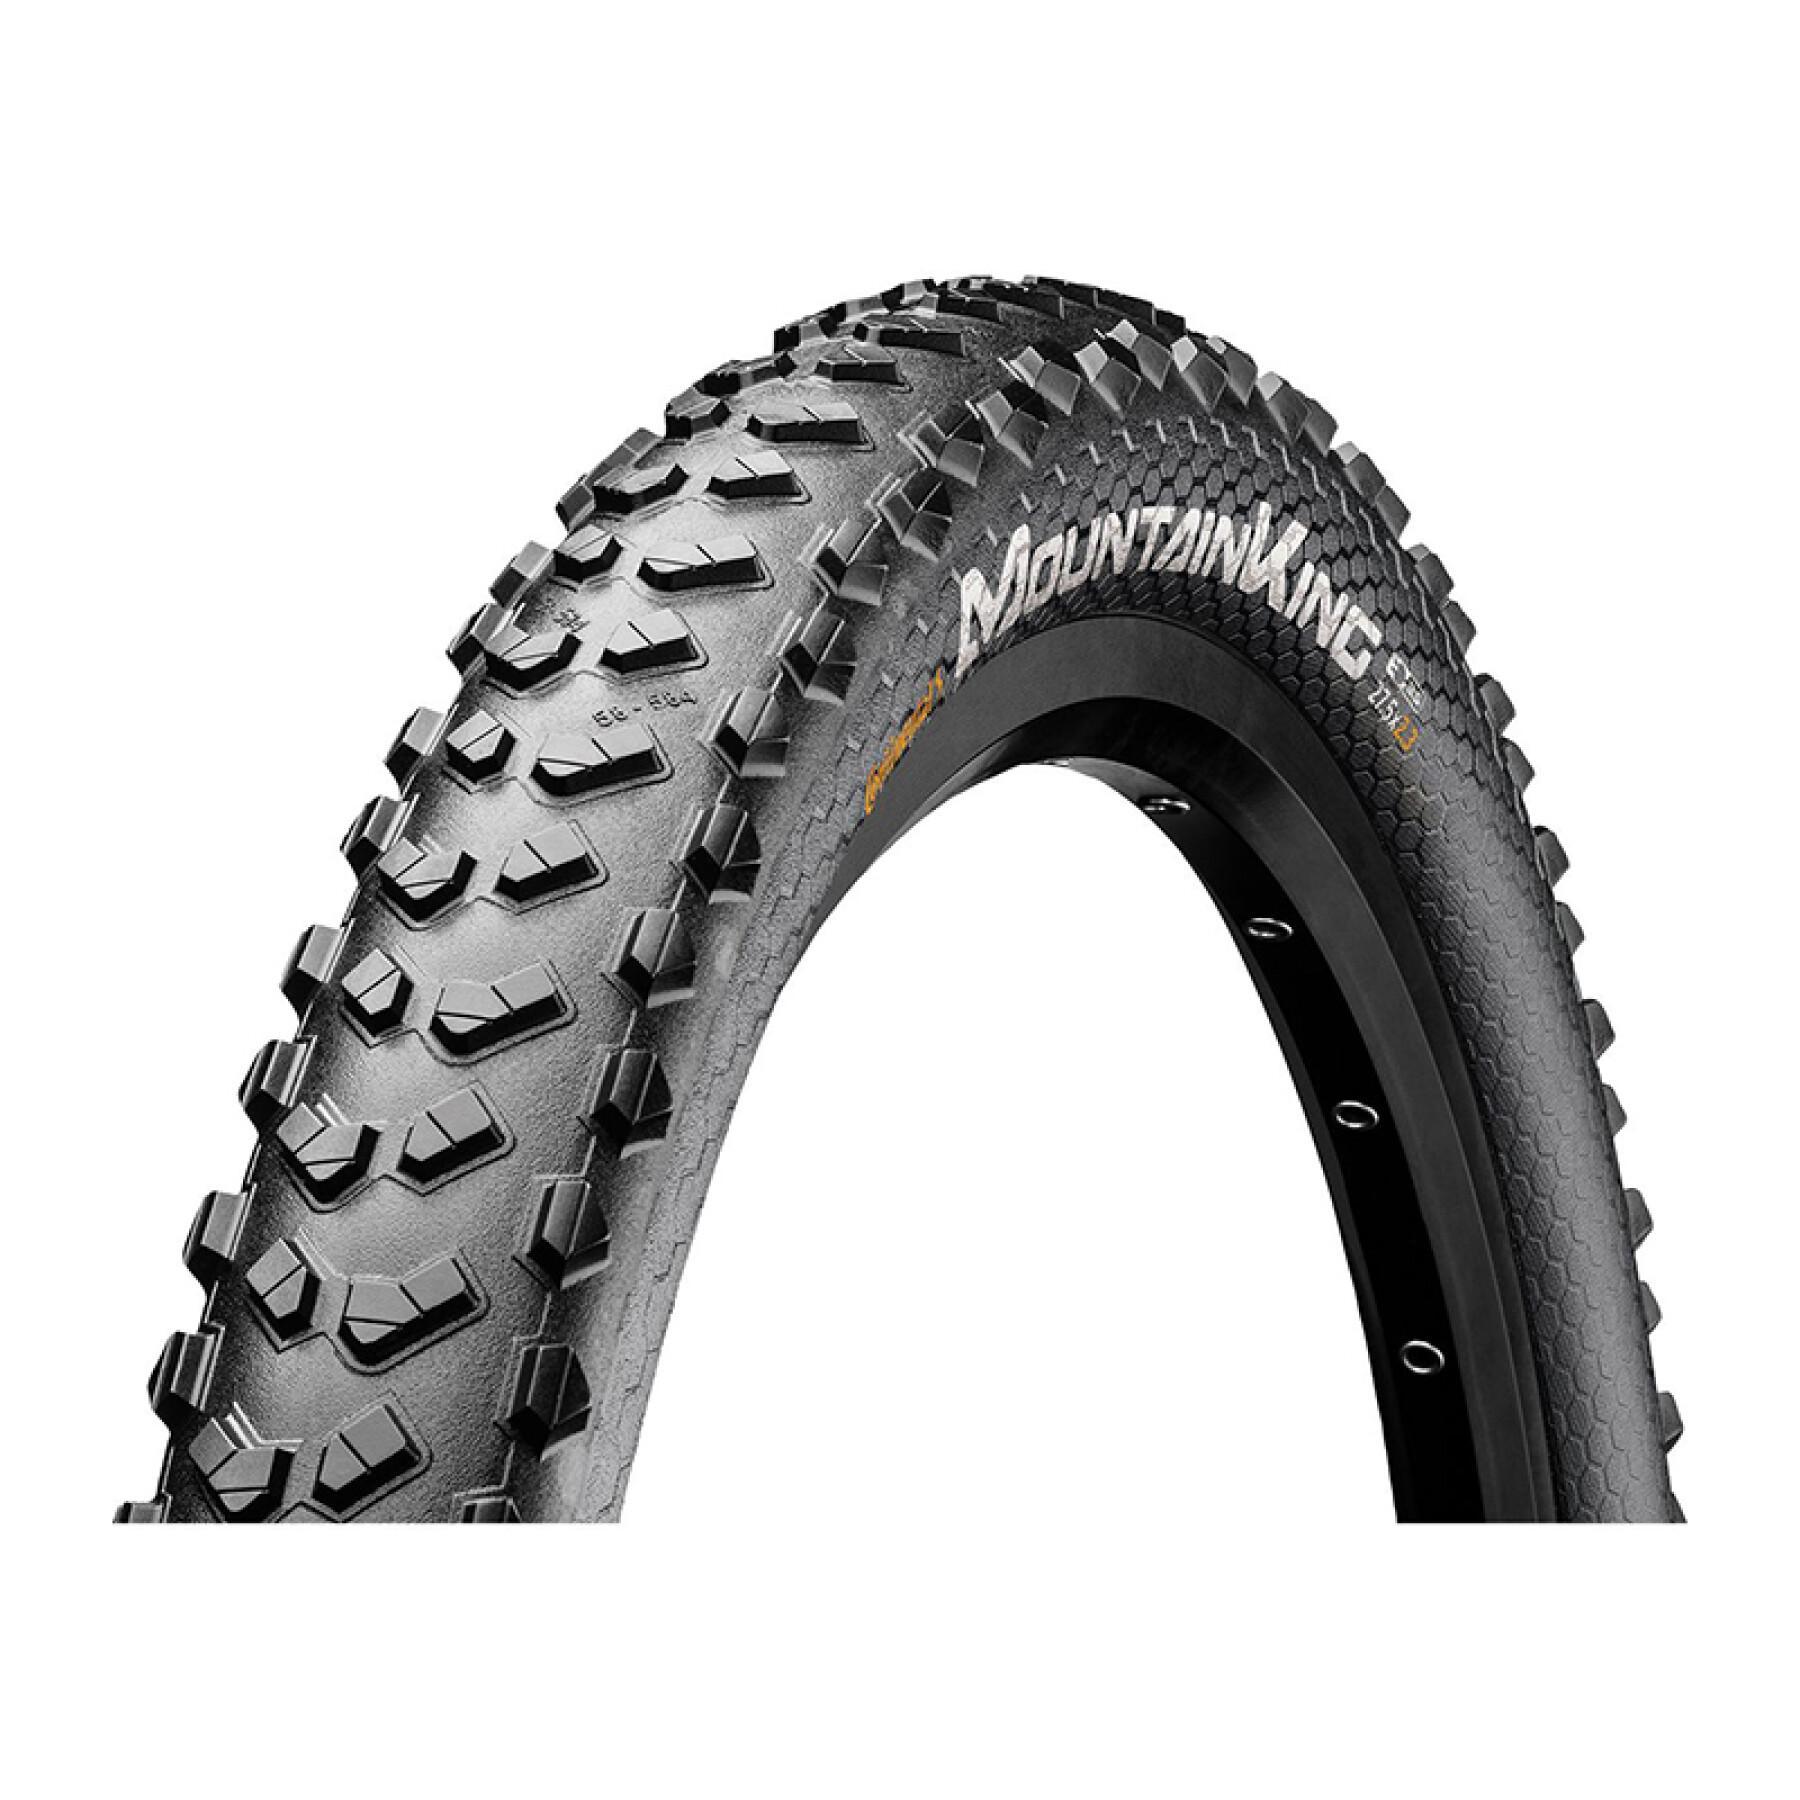 Rigid mountain bike tire with reflective Continental Mountain King 58-559